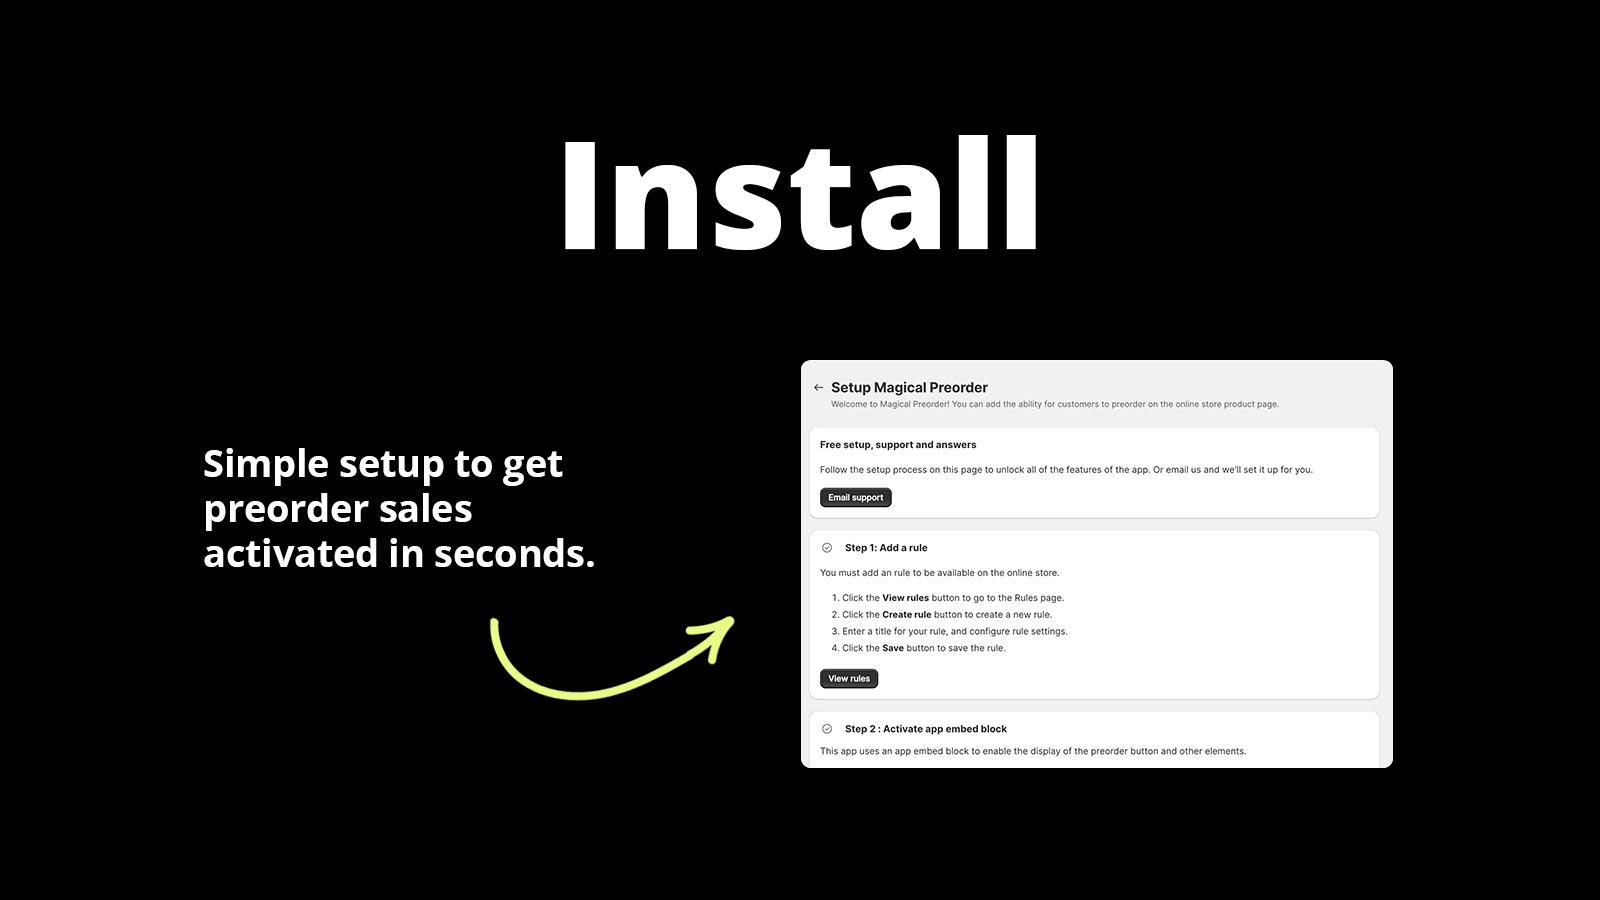 Install. Simple setup to get preorder sales activated in seconds.